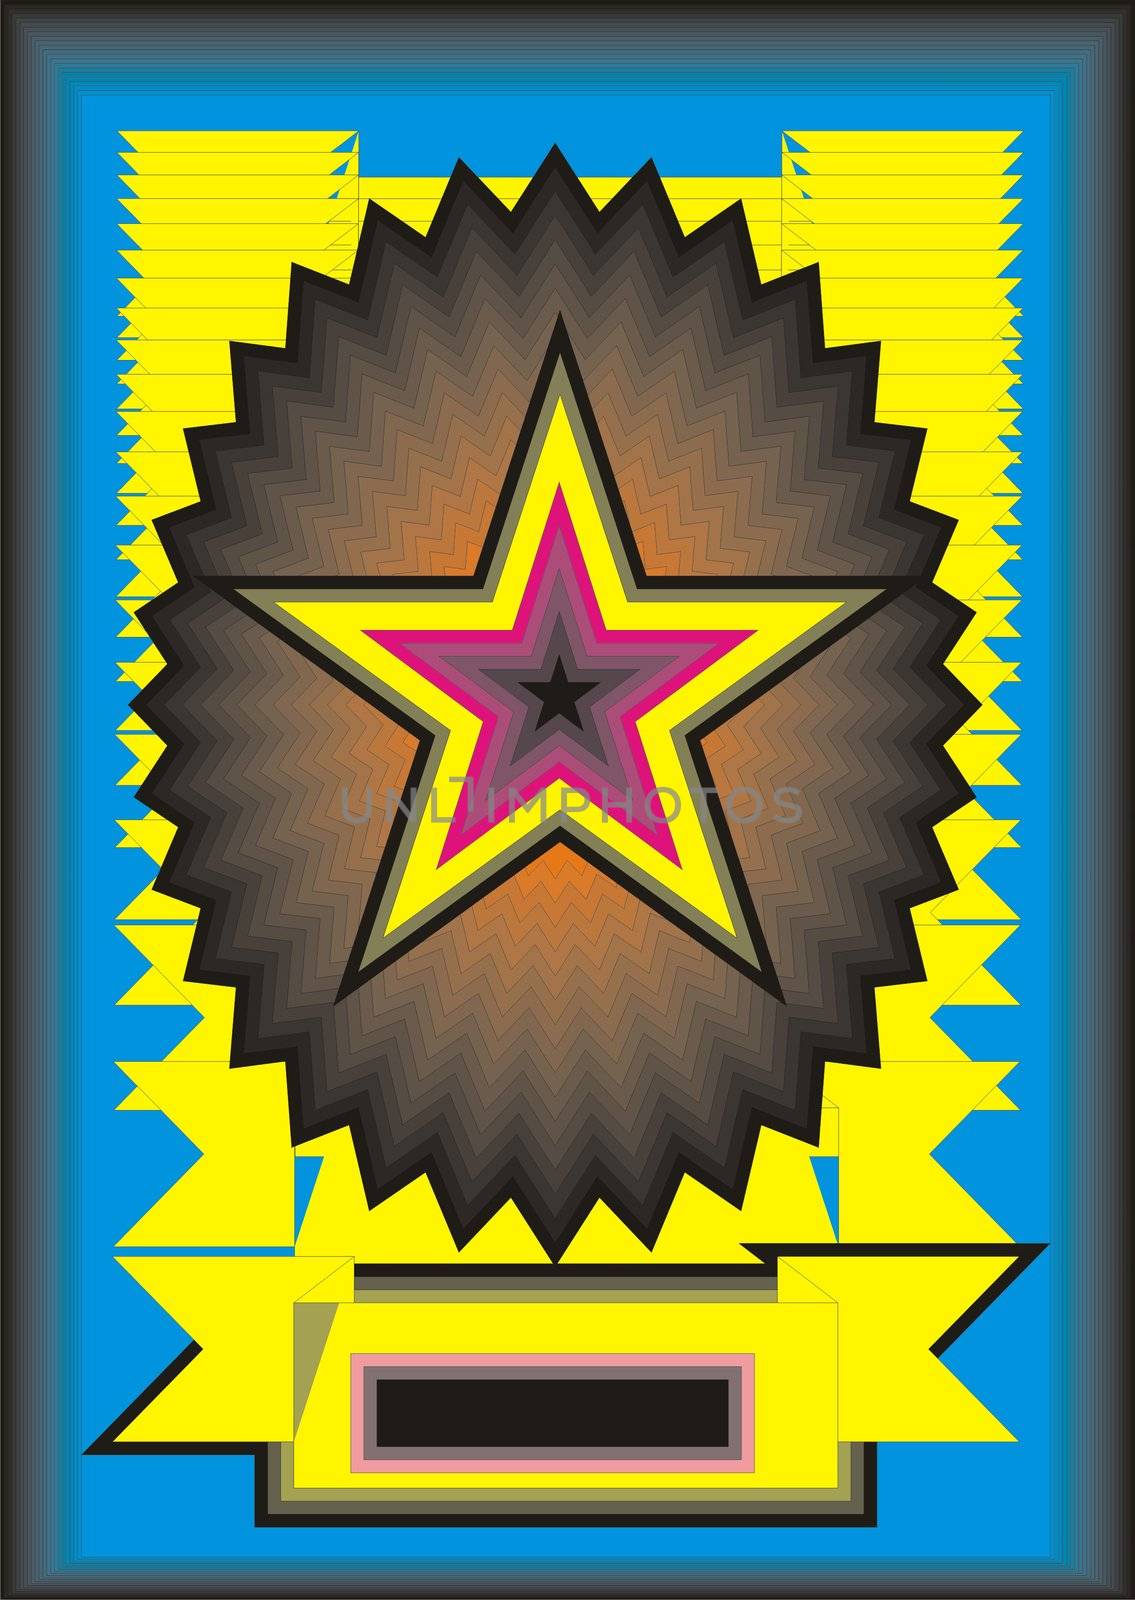 great creative abstract colored bright portrayal of a star emblem.